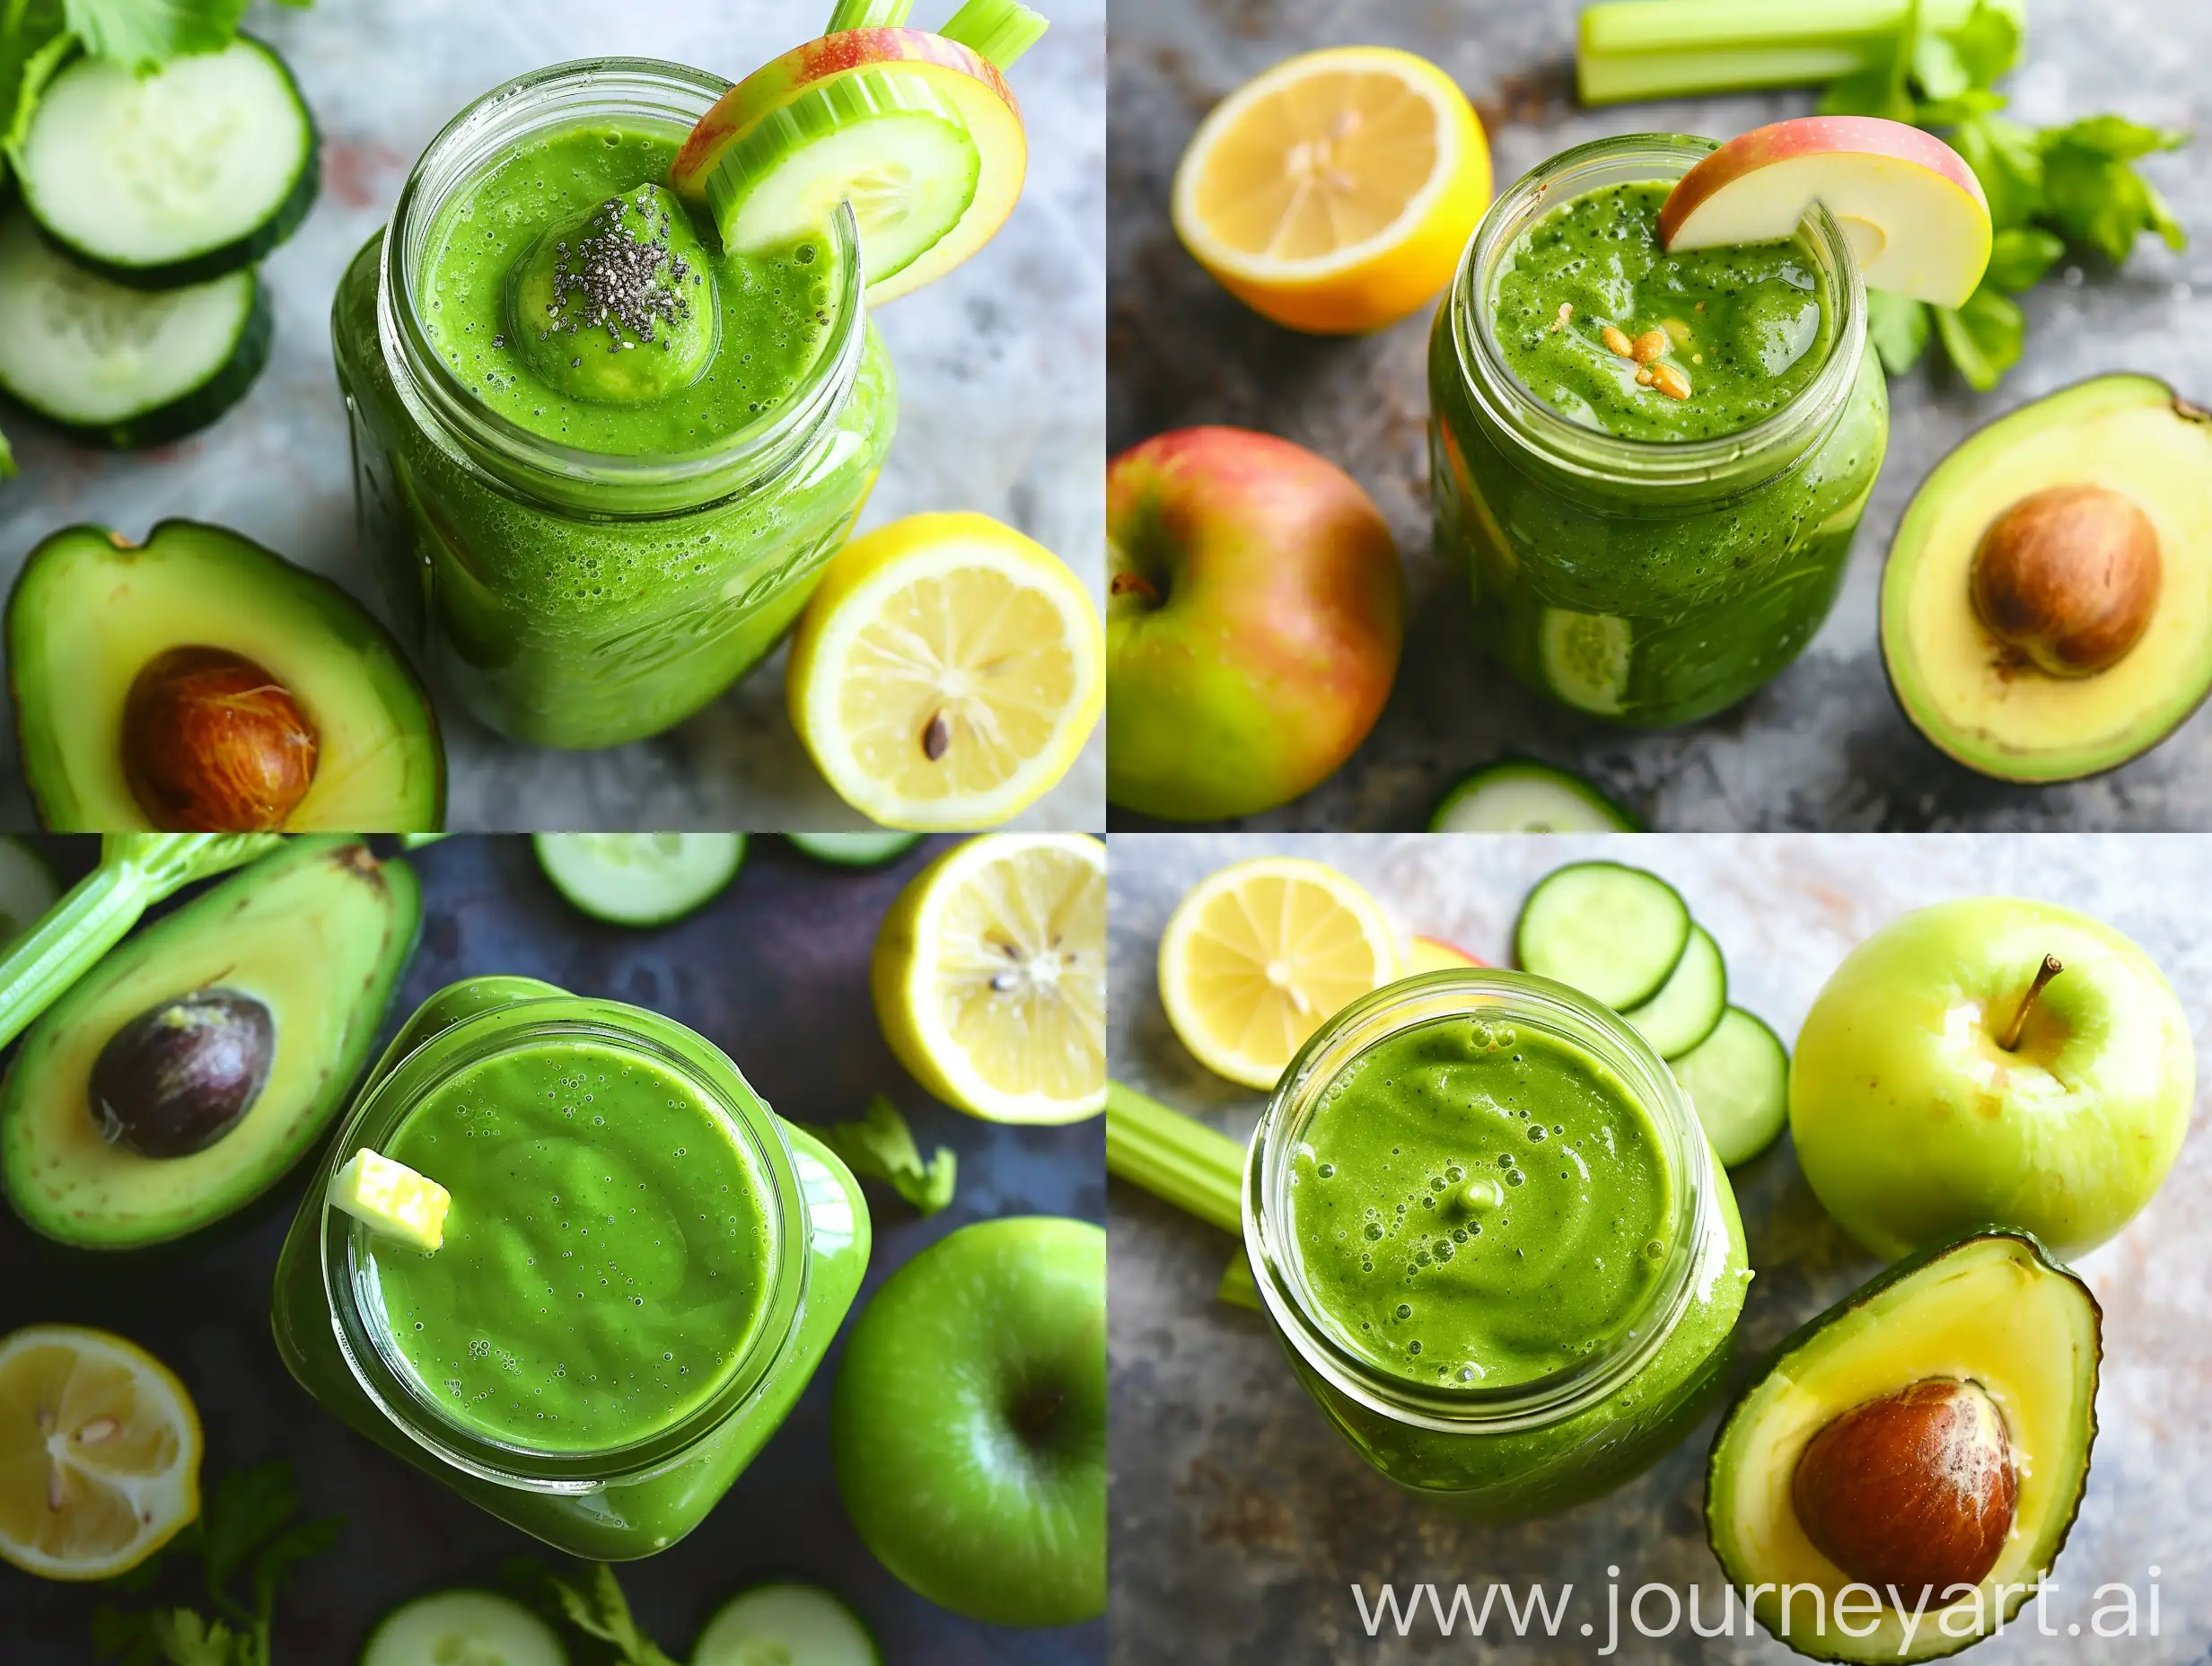 Refreshing-Green-Smoothie-with-Apple-Avocado-Celery-and-Cucumber-in-Jar